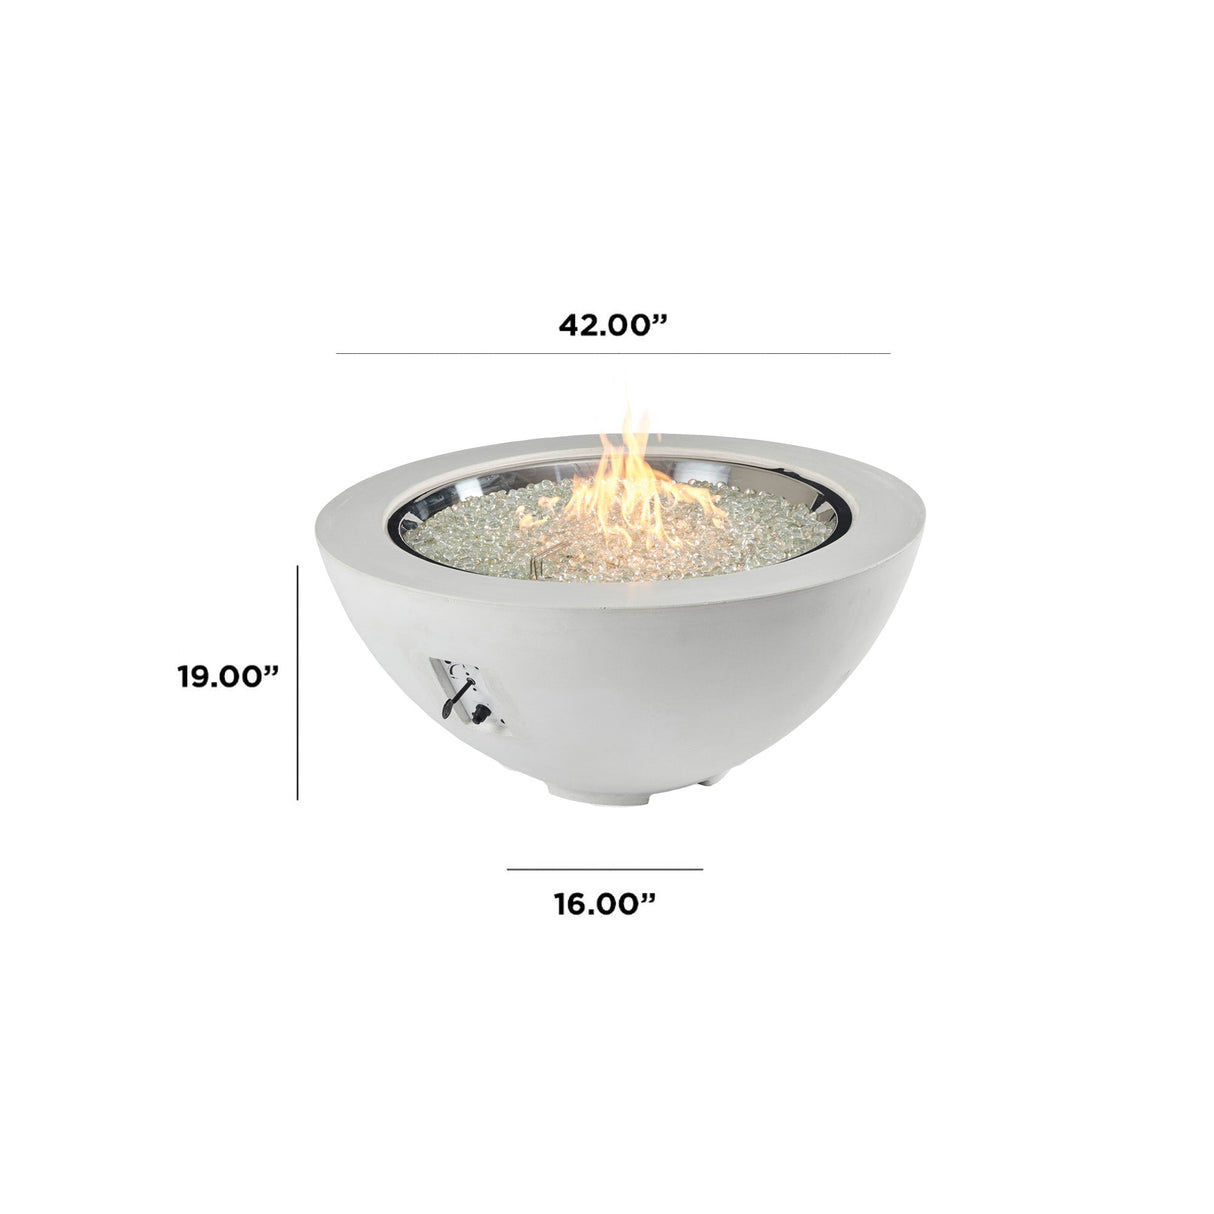 Dimensions overlaid on a White Cove Round Gas Fire Pit Bowl 42"